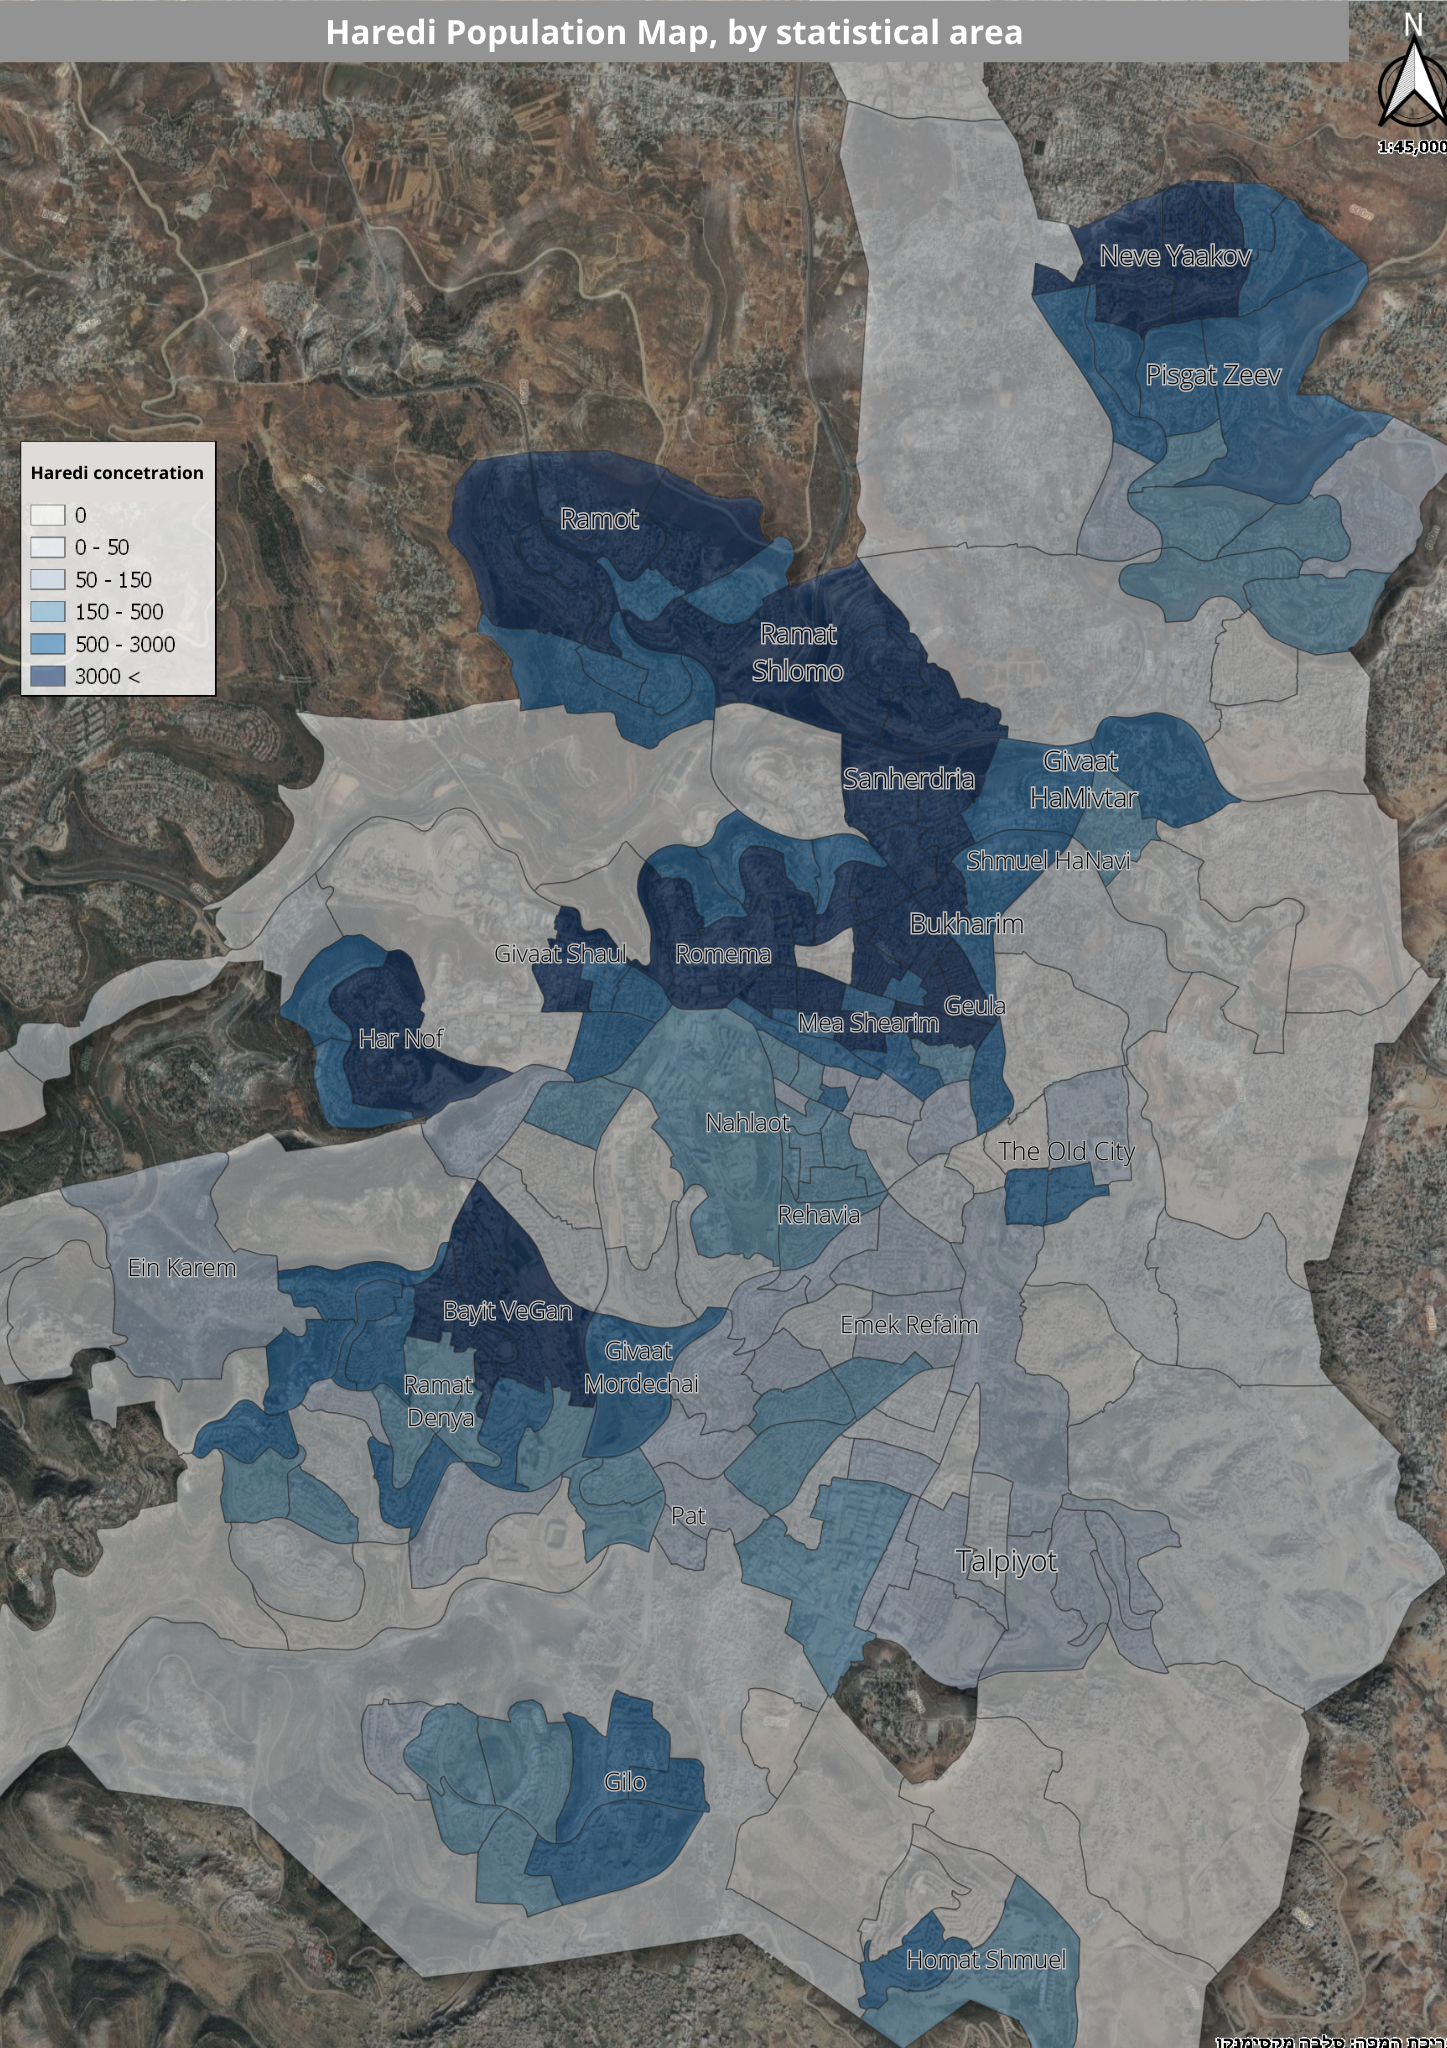 Haredi Population Map by statistical area